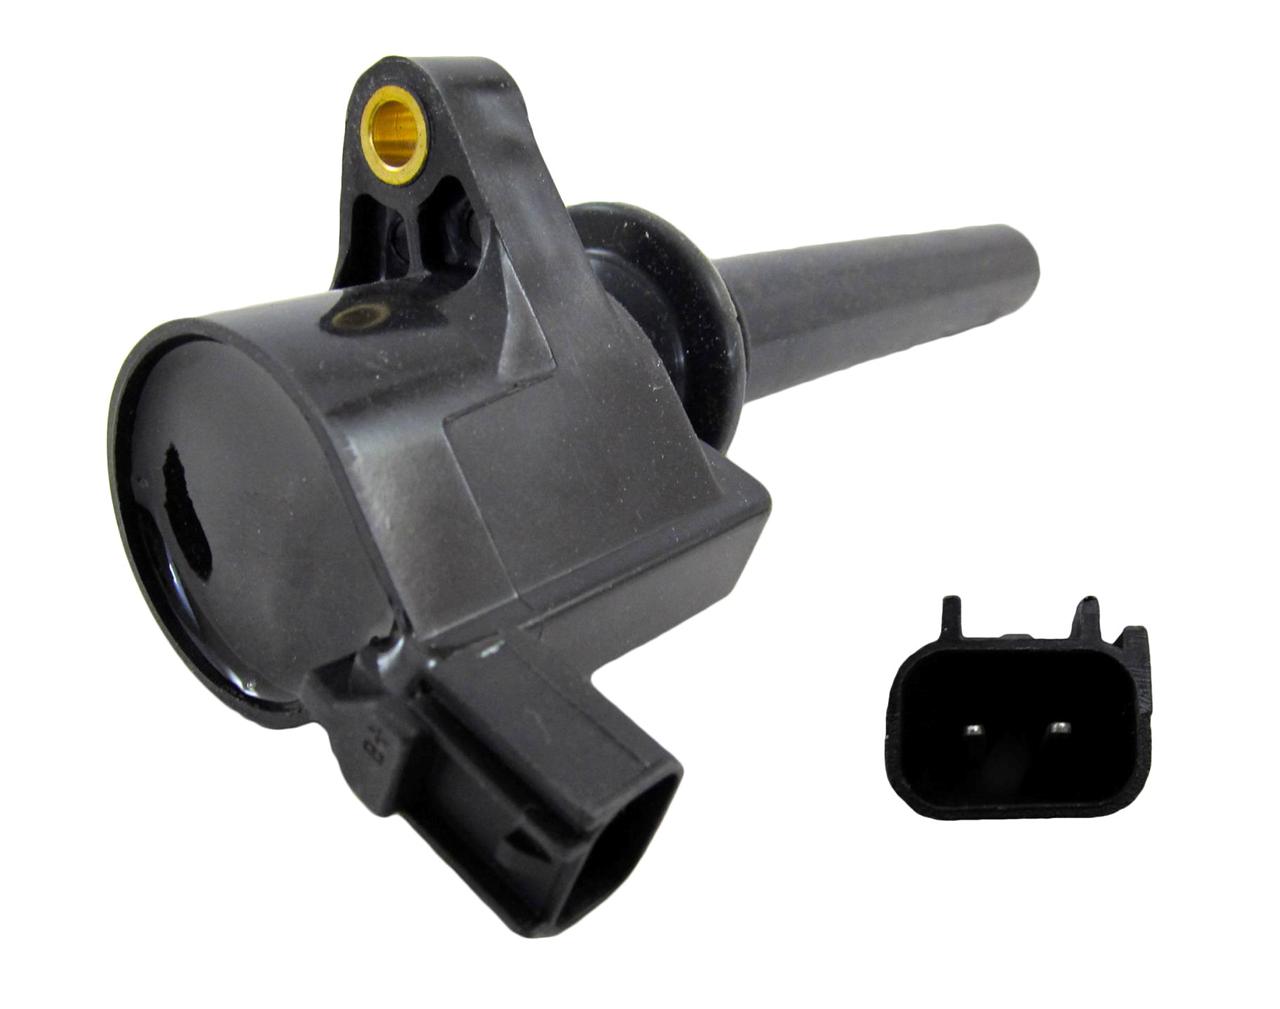 Rareelectrical NEW IGNITION COIL COMPATIBLE WITH FORD FREESTYLE V6 3.0 AJC1-18-100 CFD502 C1458 IC386 E261 AJ03-18-100A AJ03-18-100B